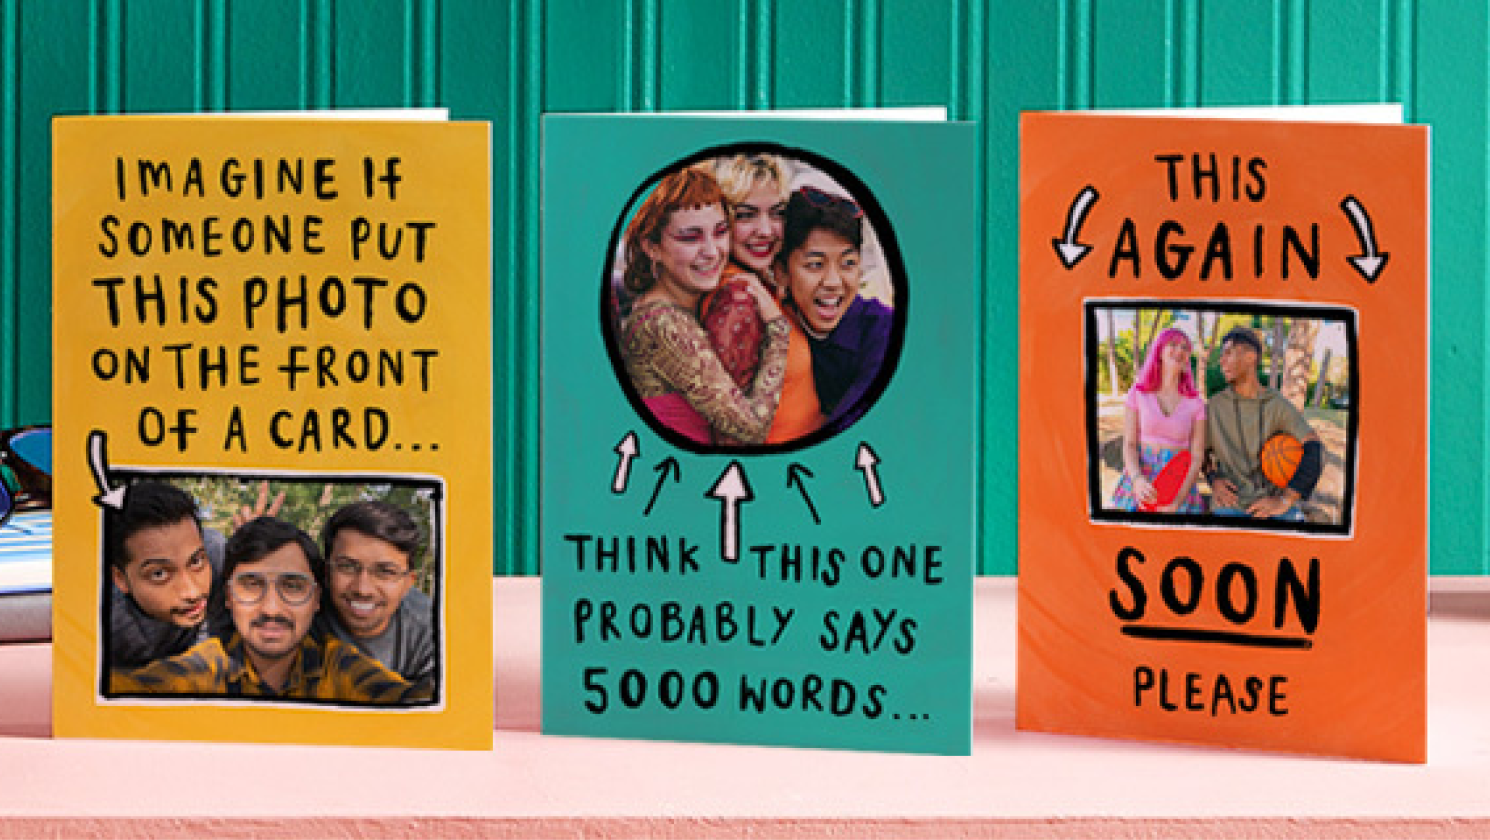 Image of three greetings cards, each with space to add a photo, that read: 'Imagine if someone put this photo on the front of a card", "Think this one probably says 5000 words" and "This again soon please"